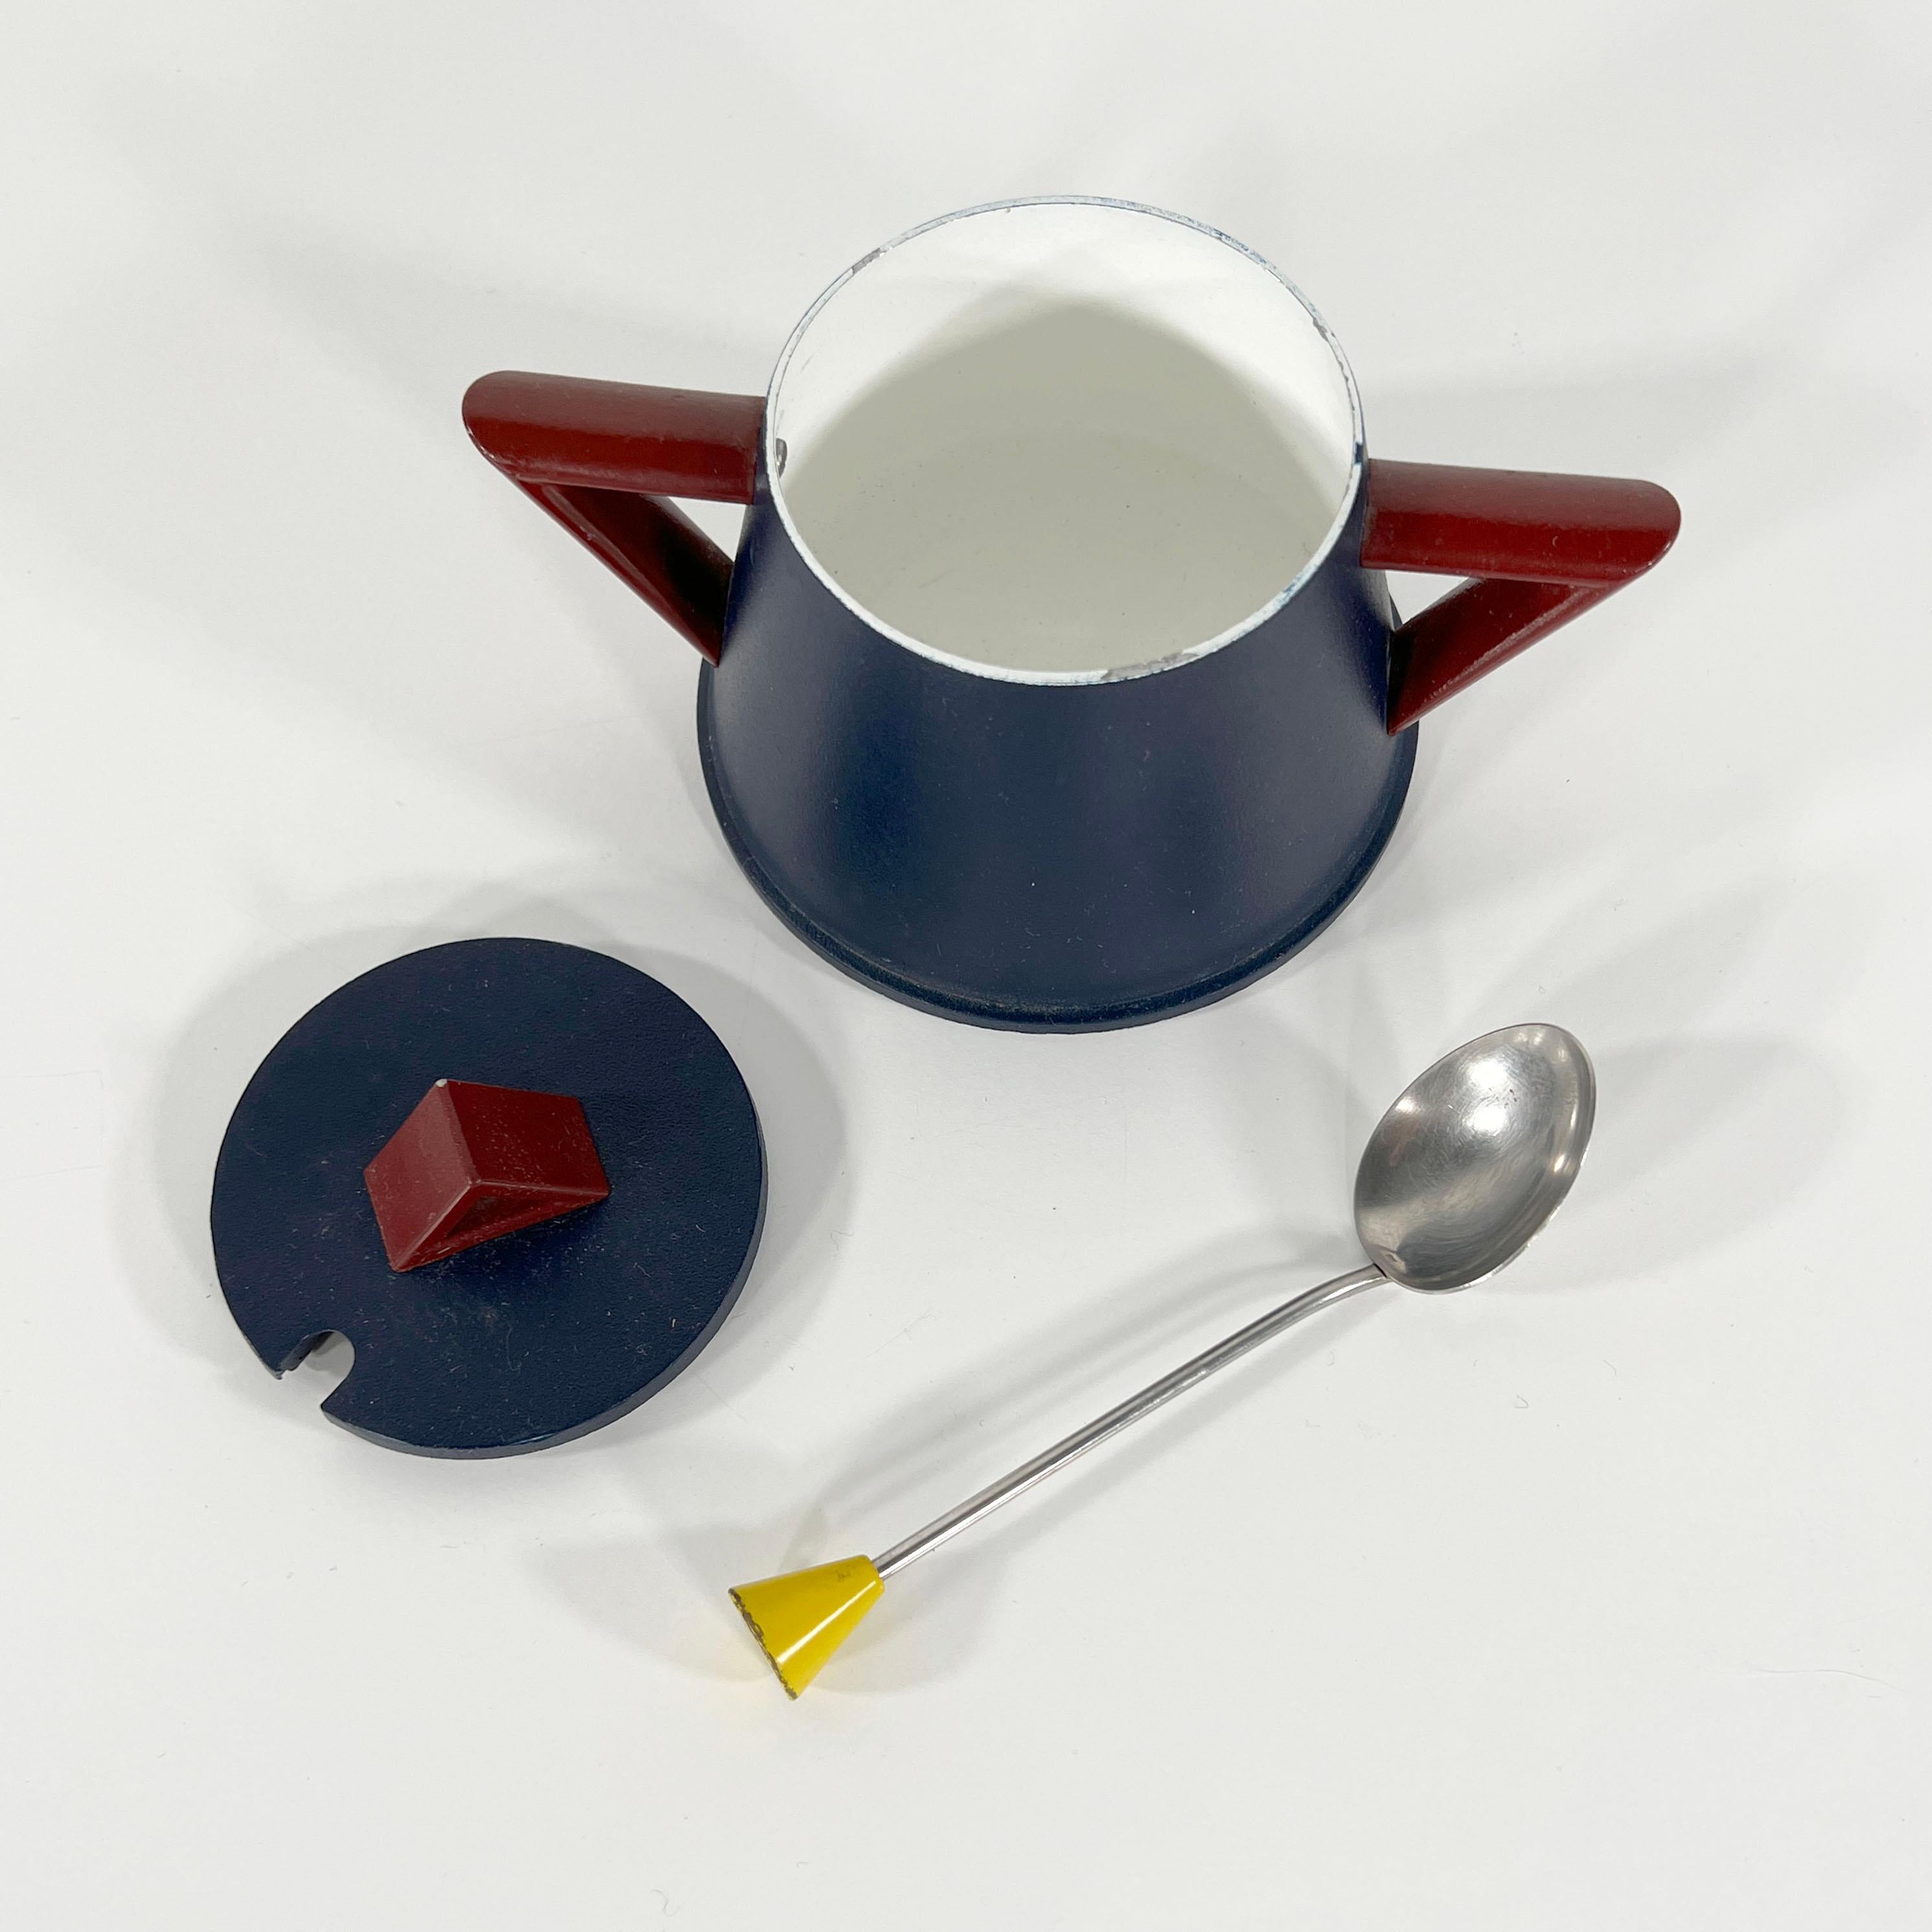 Italian Sugar Bowl 'Accademia' Series by Ettore Sottsass for Lagostina, 1980s